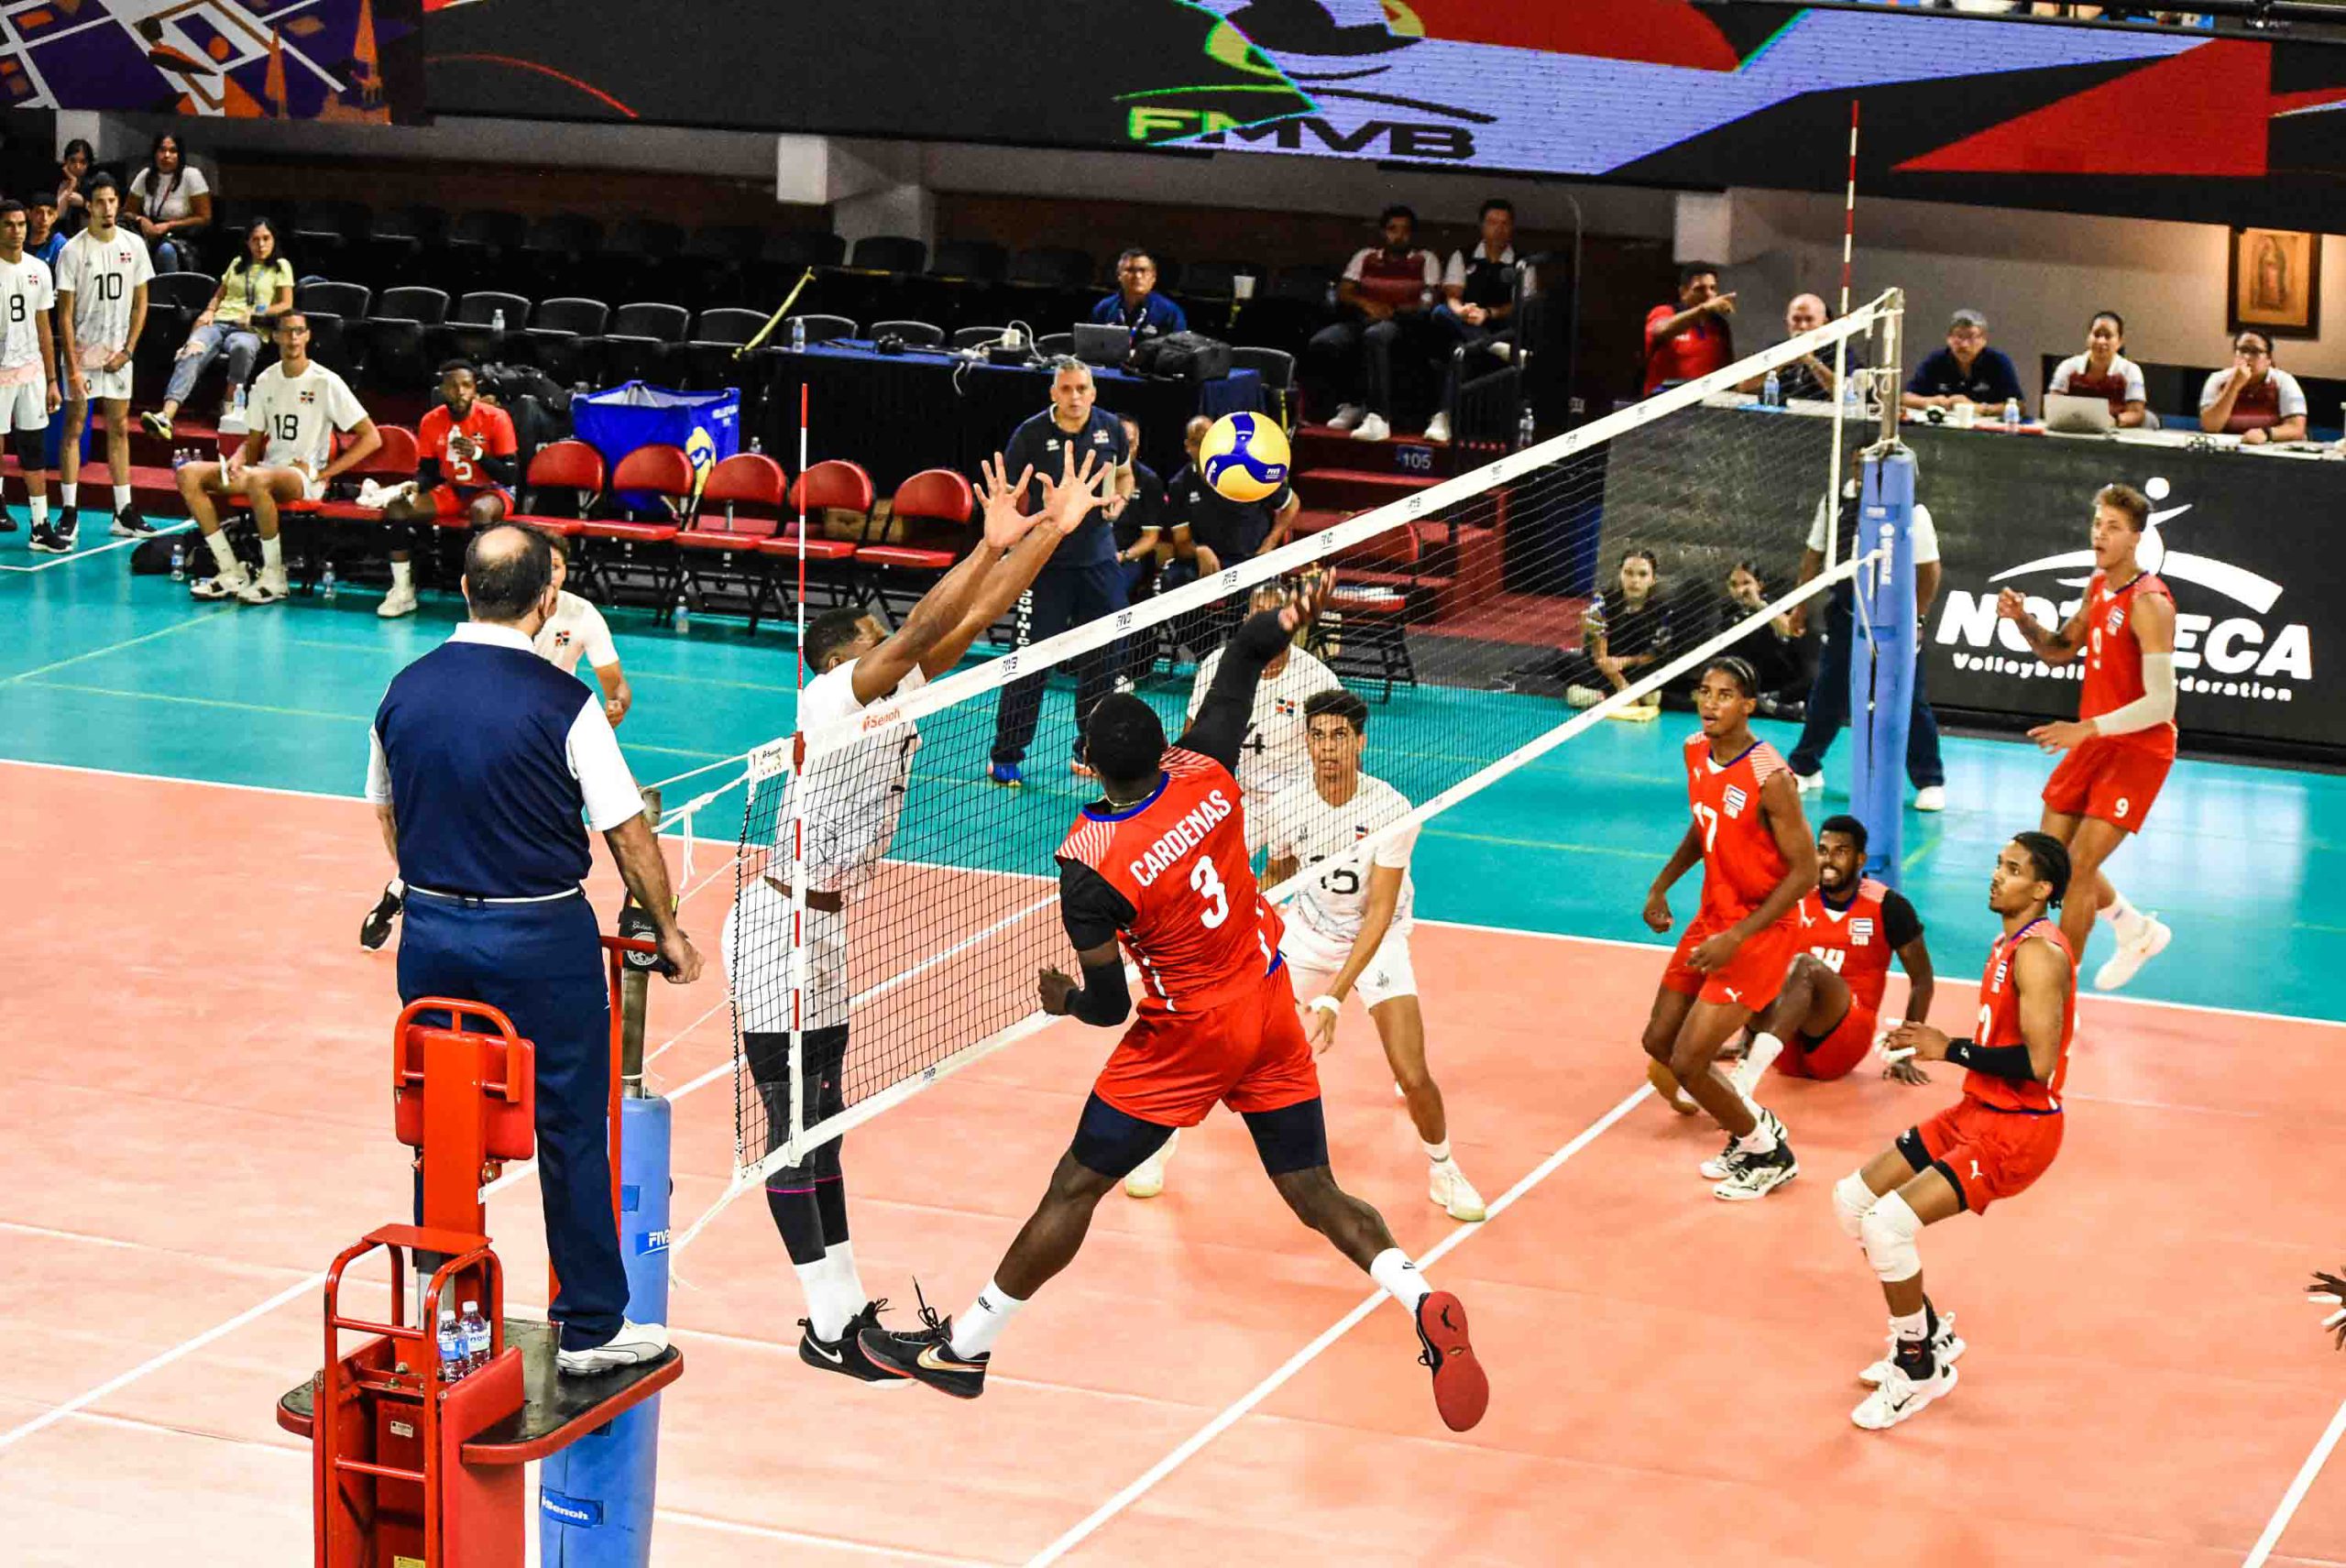 Cuba achieves straight sets victory over Dominican Republic